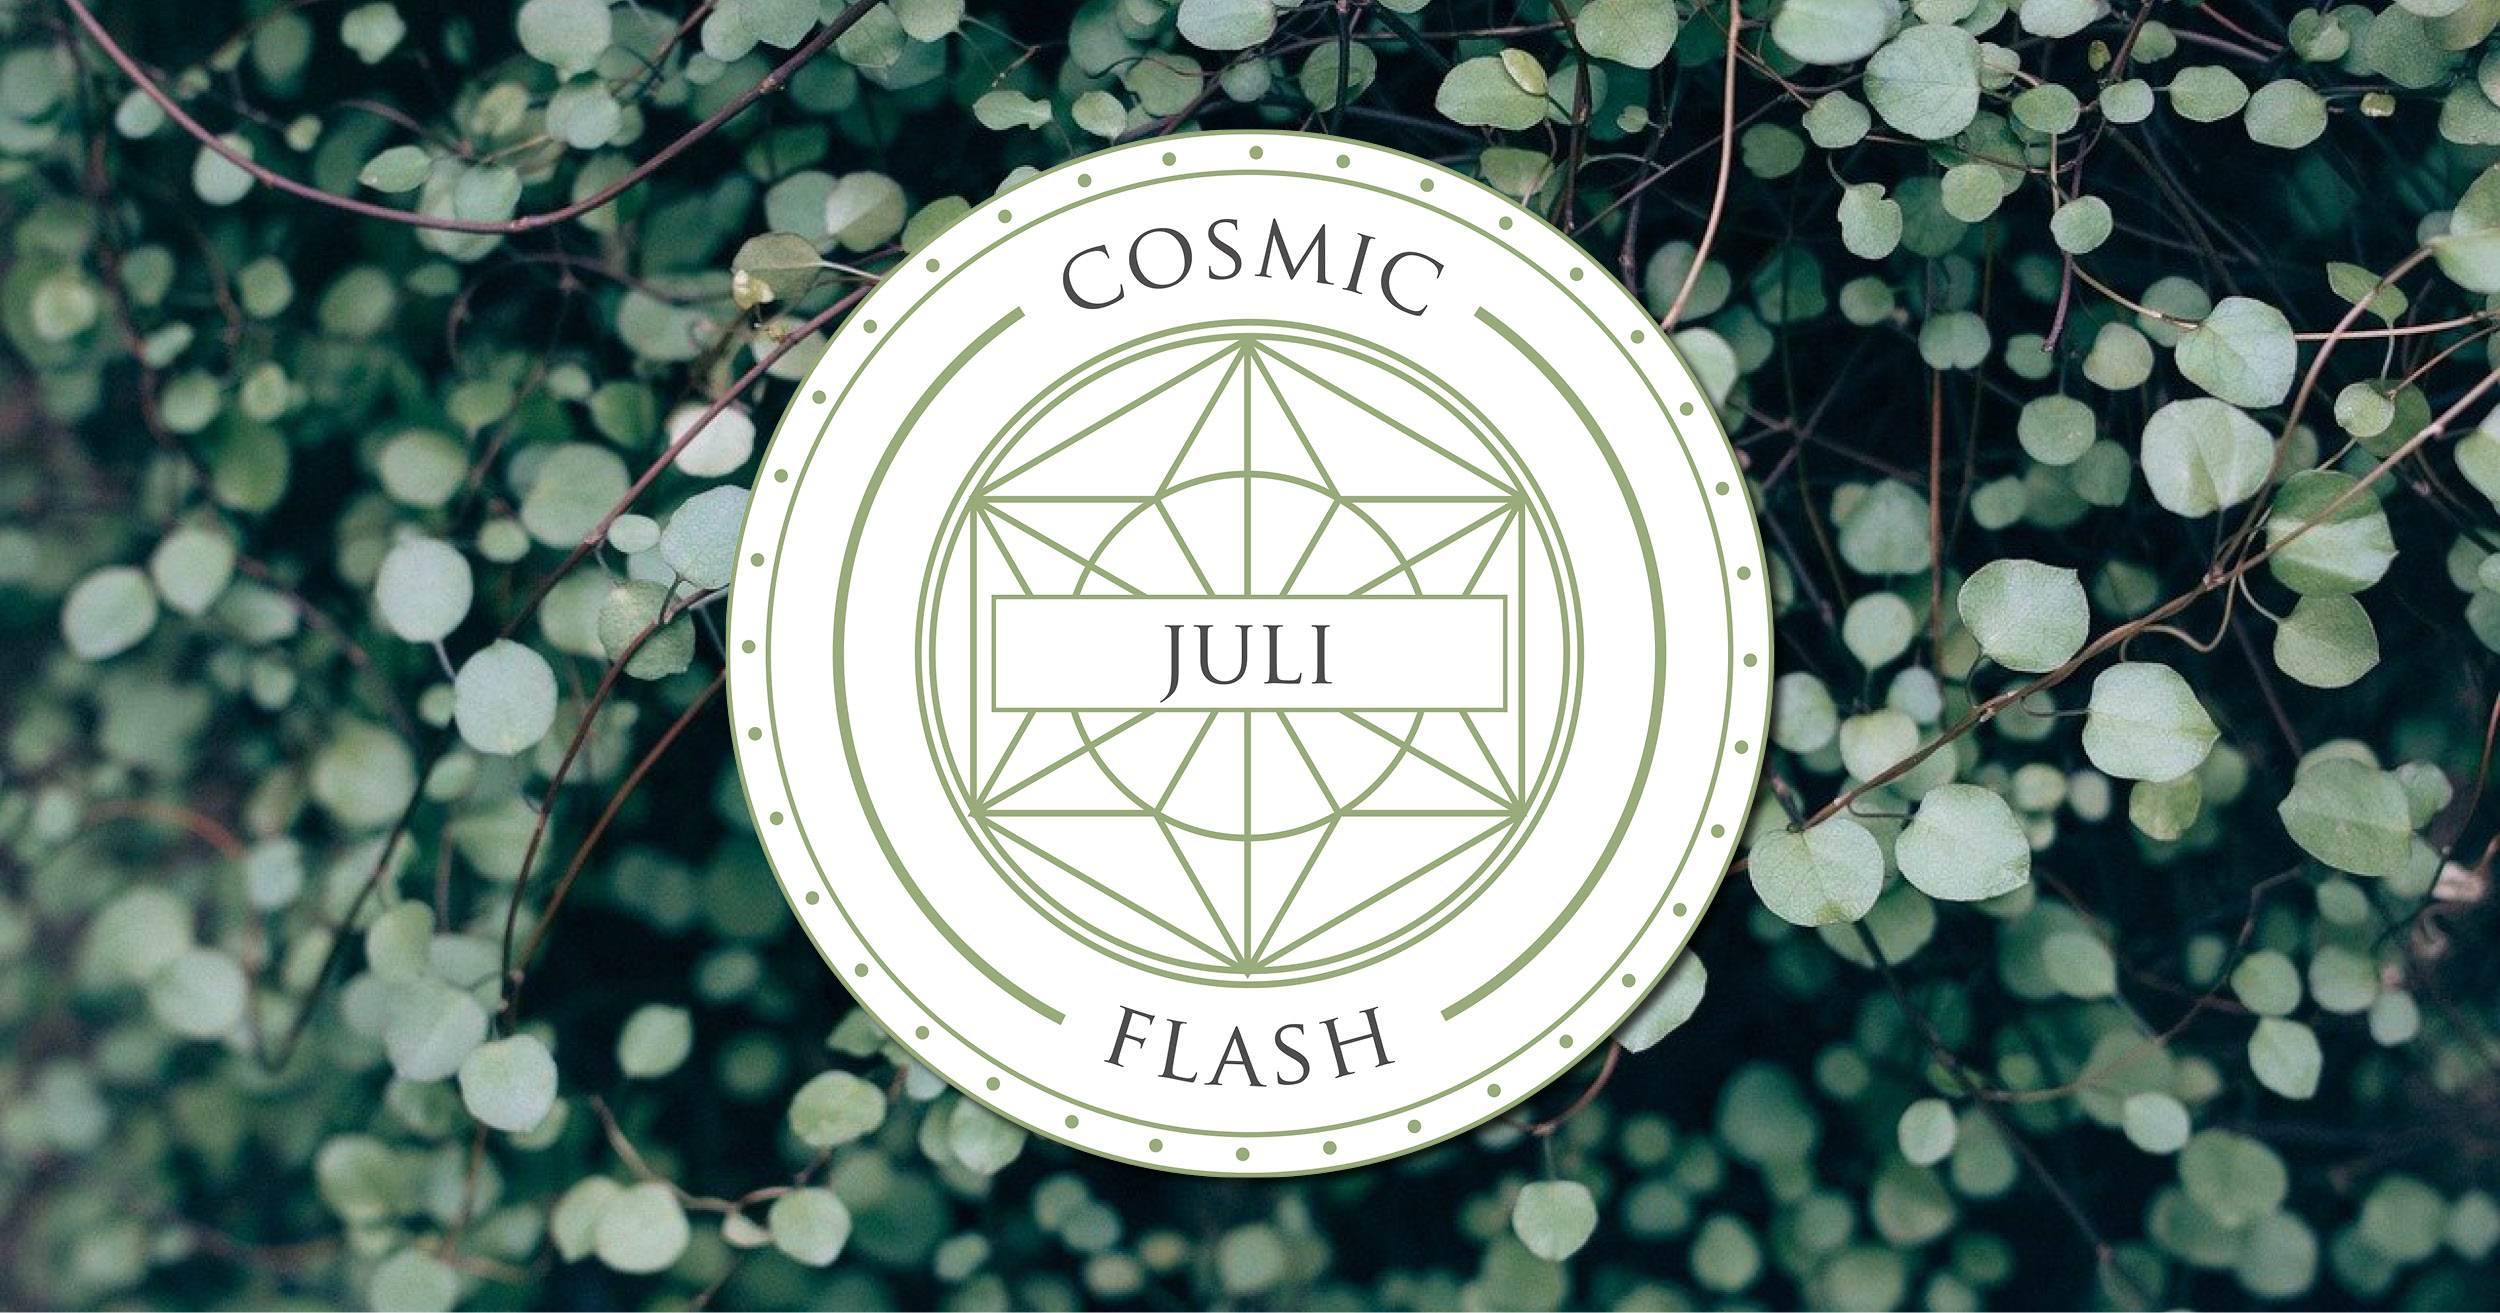 You are currently viewing Cosmic Flash – Juli 2021